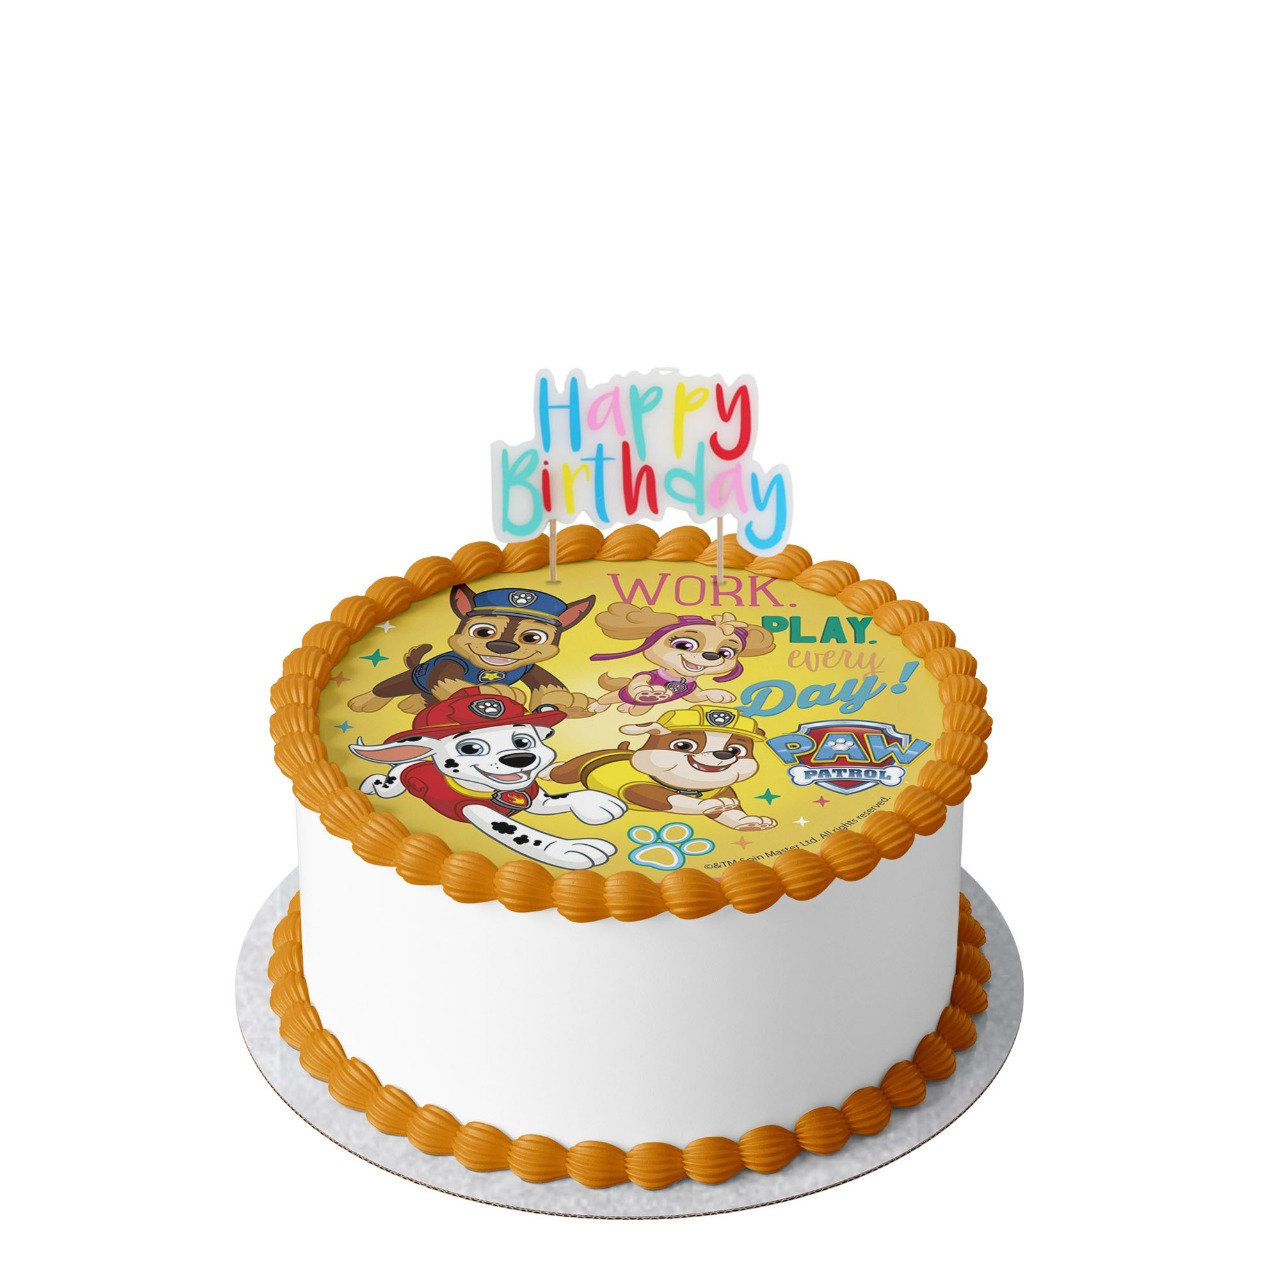 Paw Patrol Cake with Happy Birthday Candle